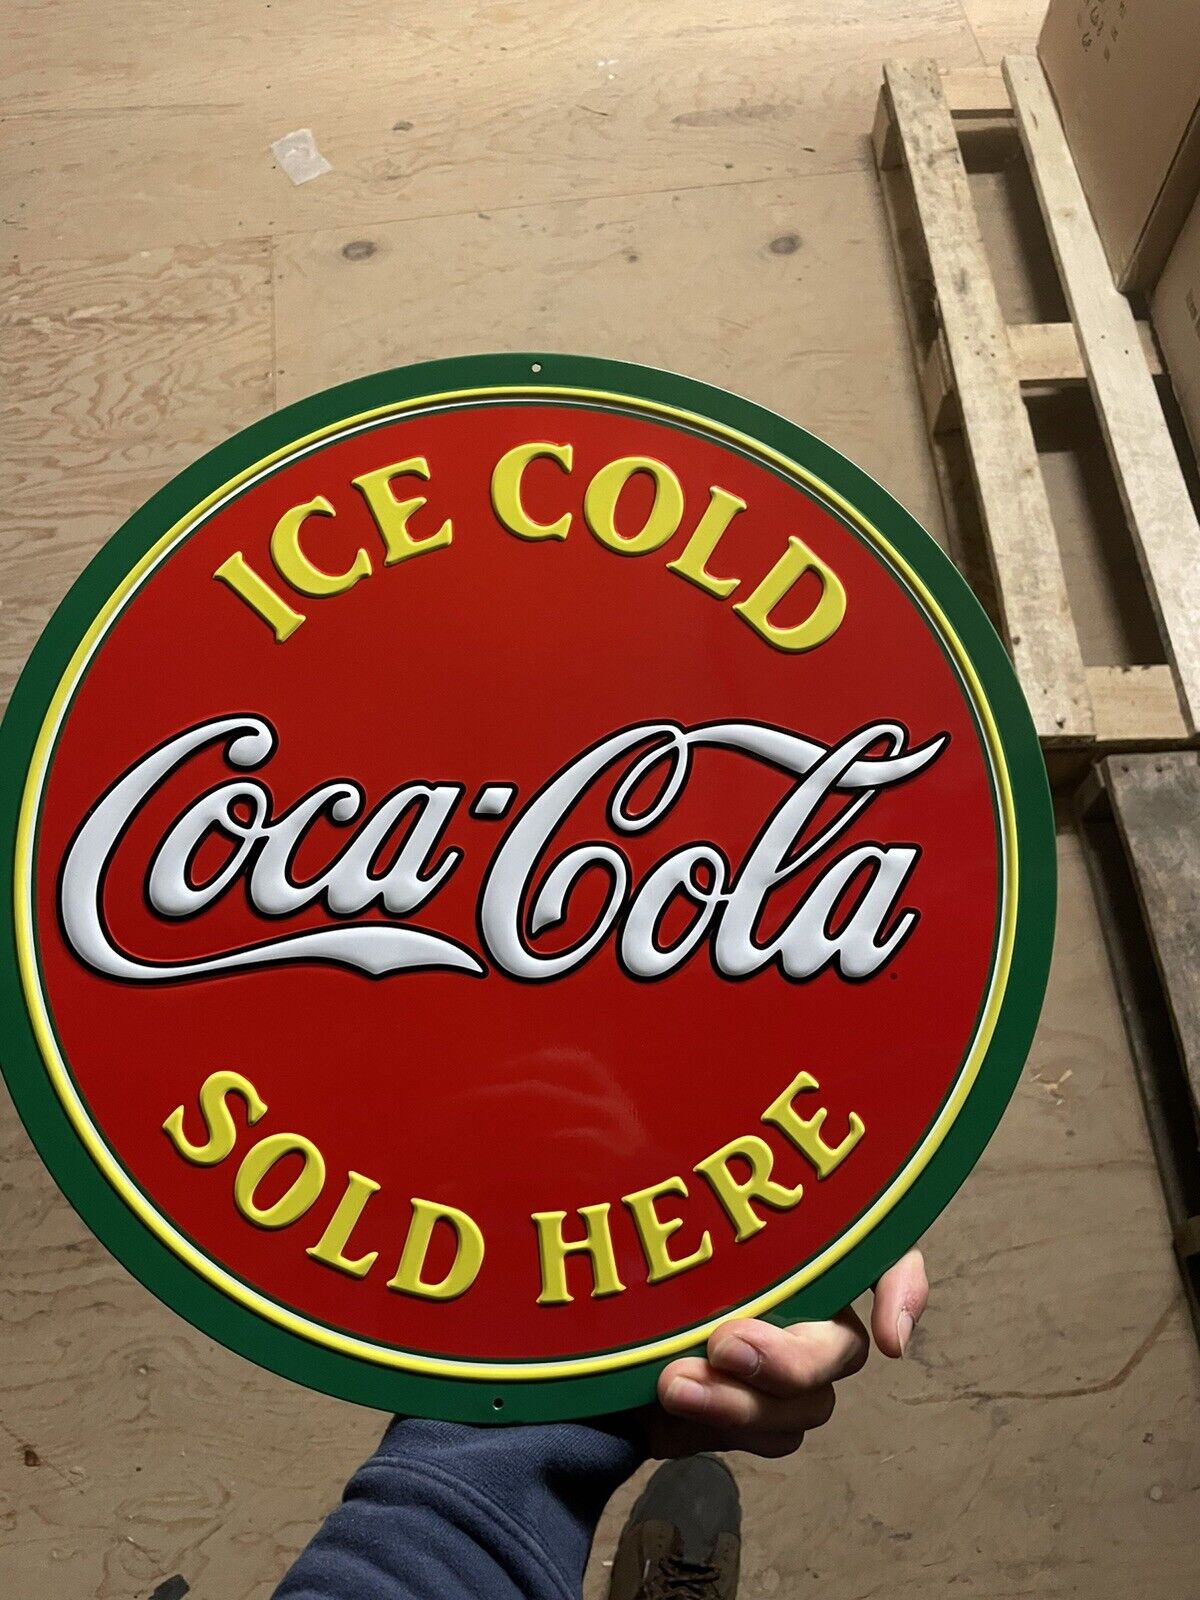 Ice Cold Coca-Cola Sold Here Embossed Tin Metal Sign - Vintage - Retro - Coke